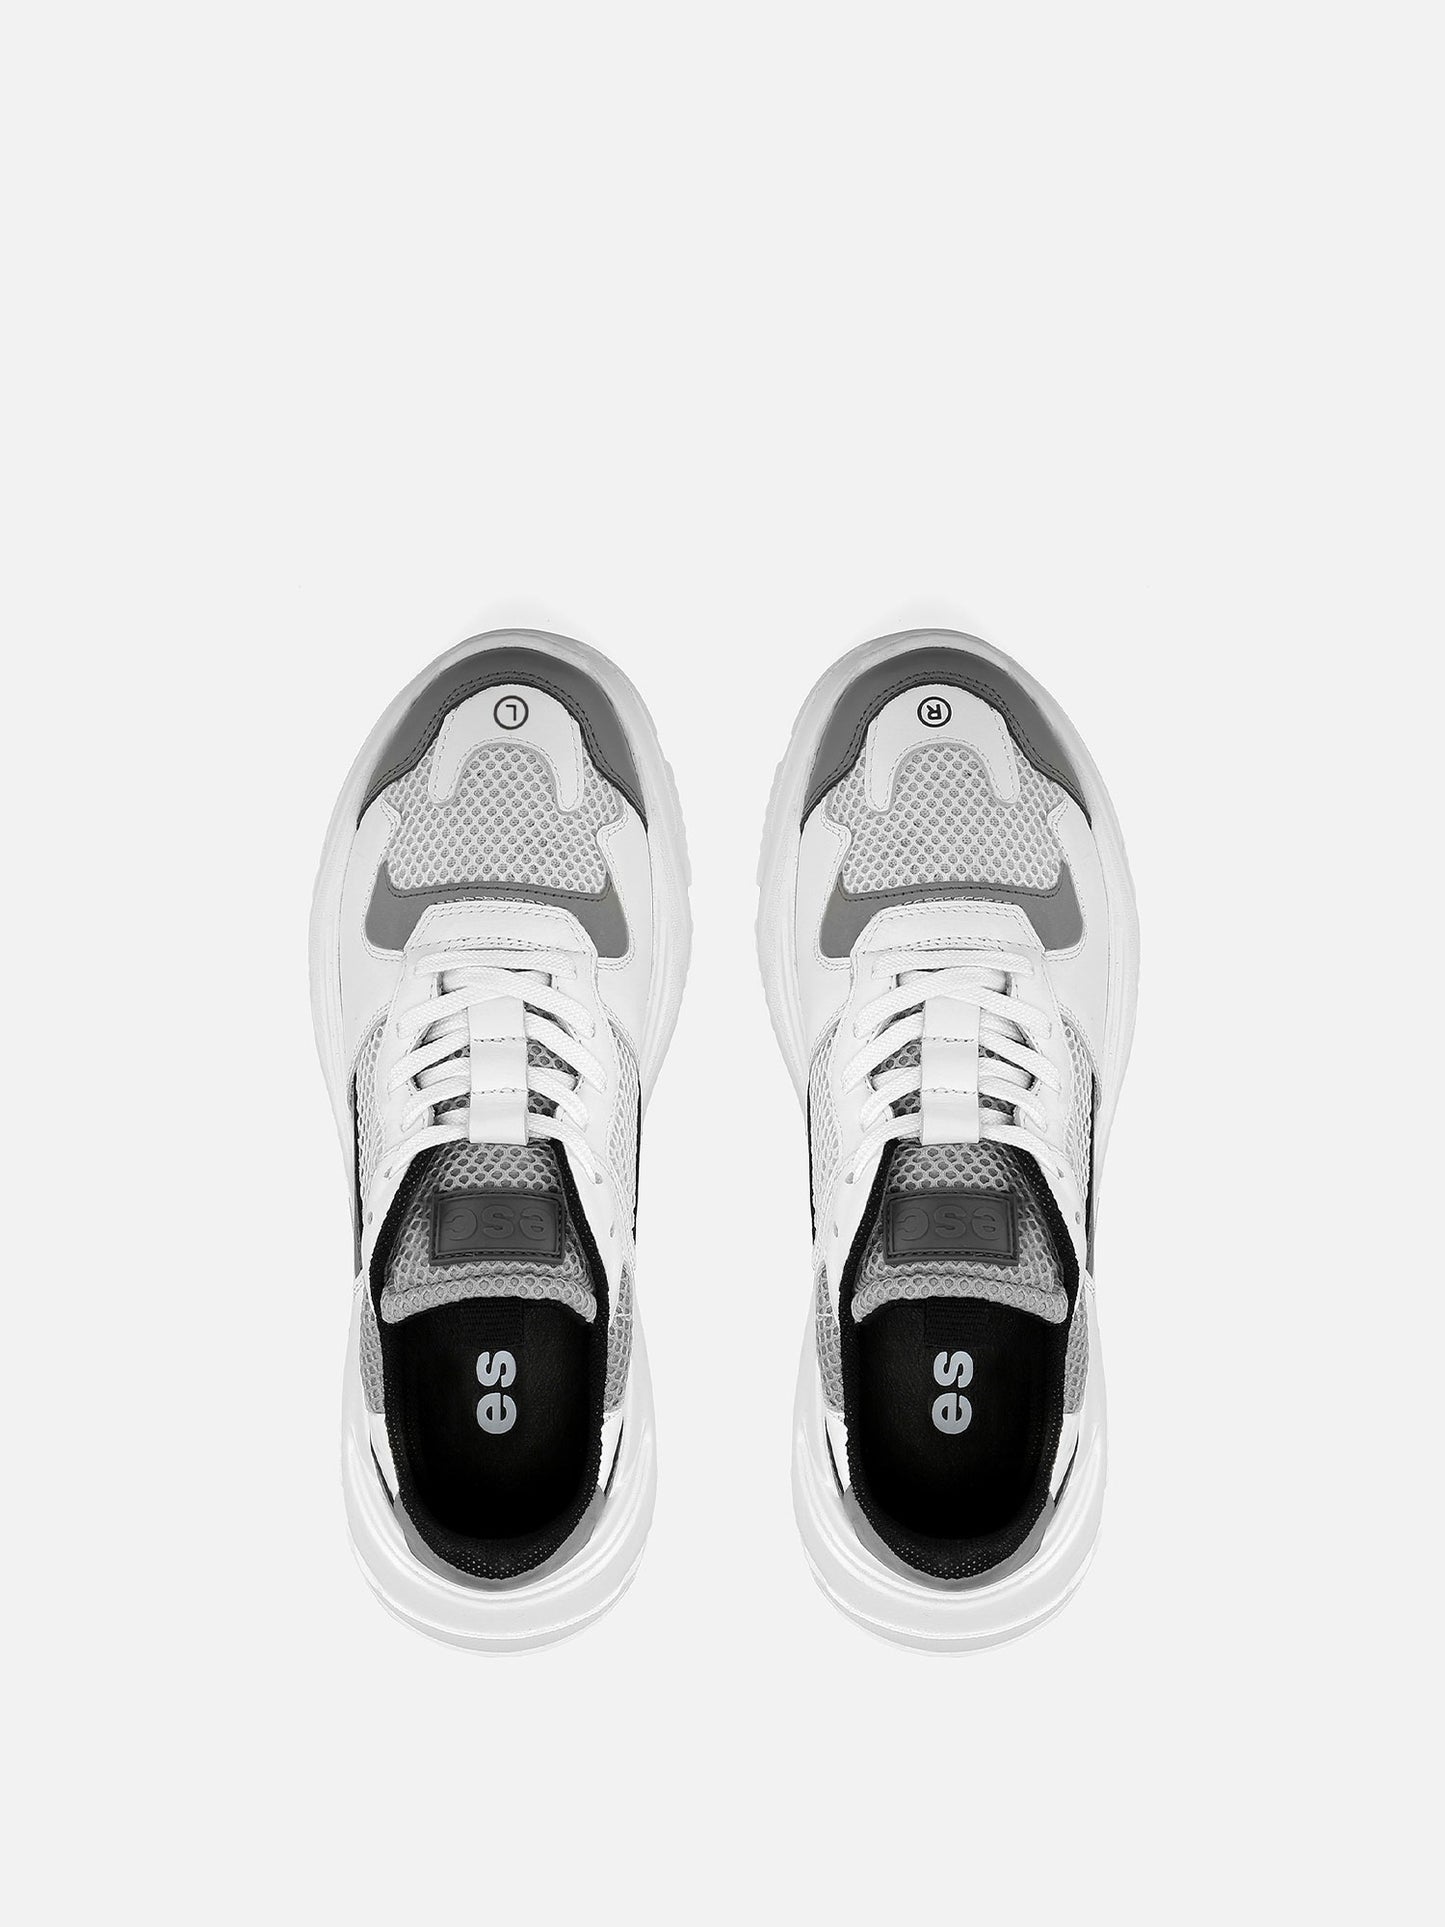 ALRICK Chunky Sneakers - White